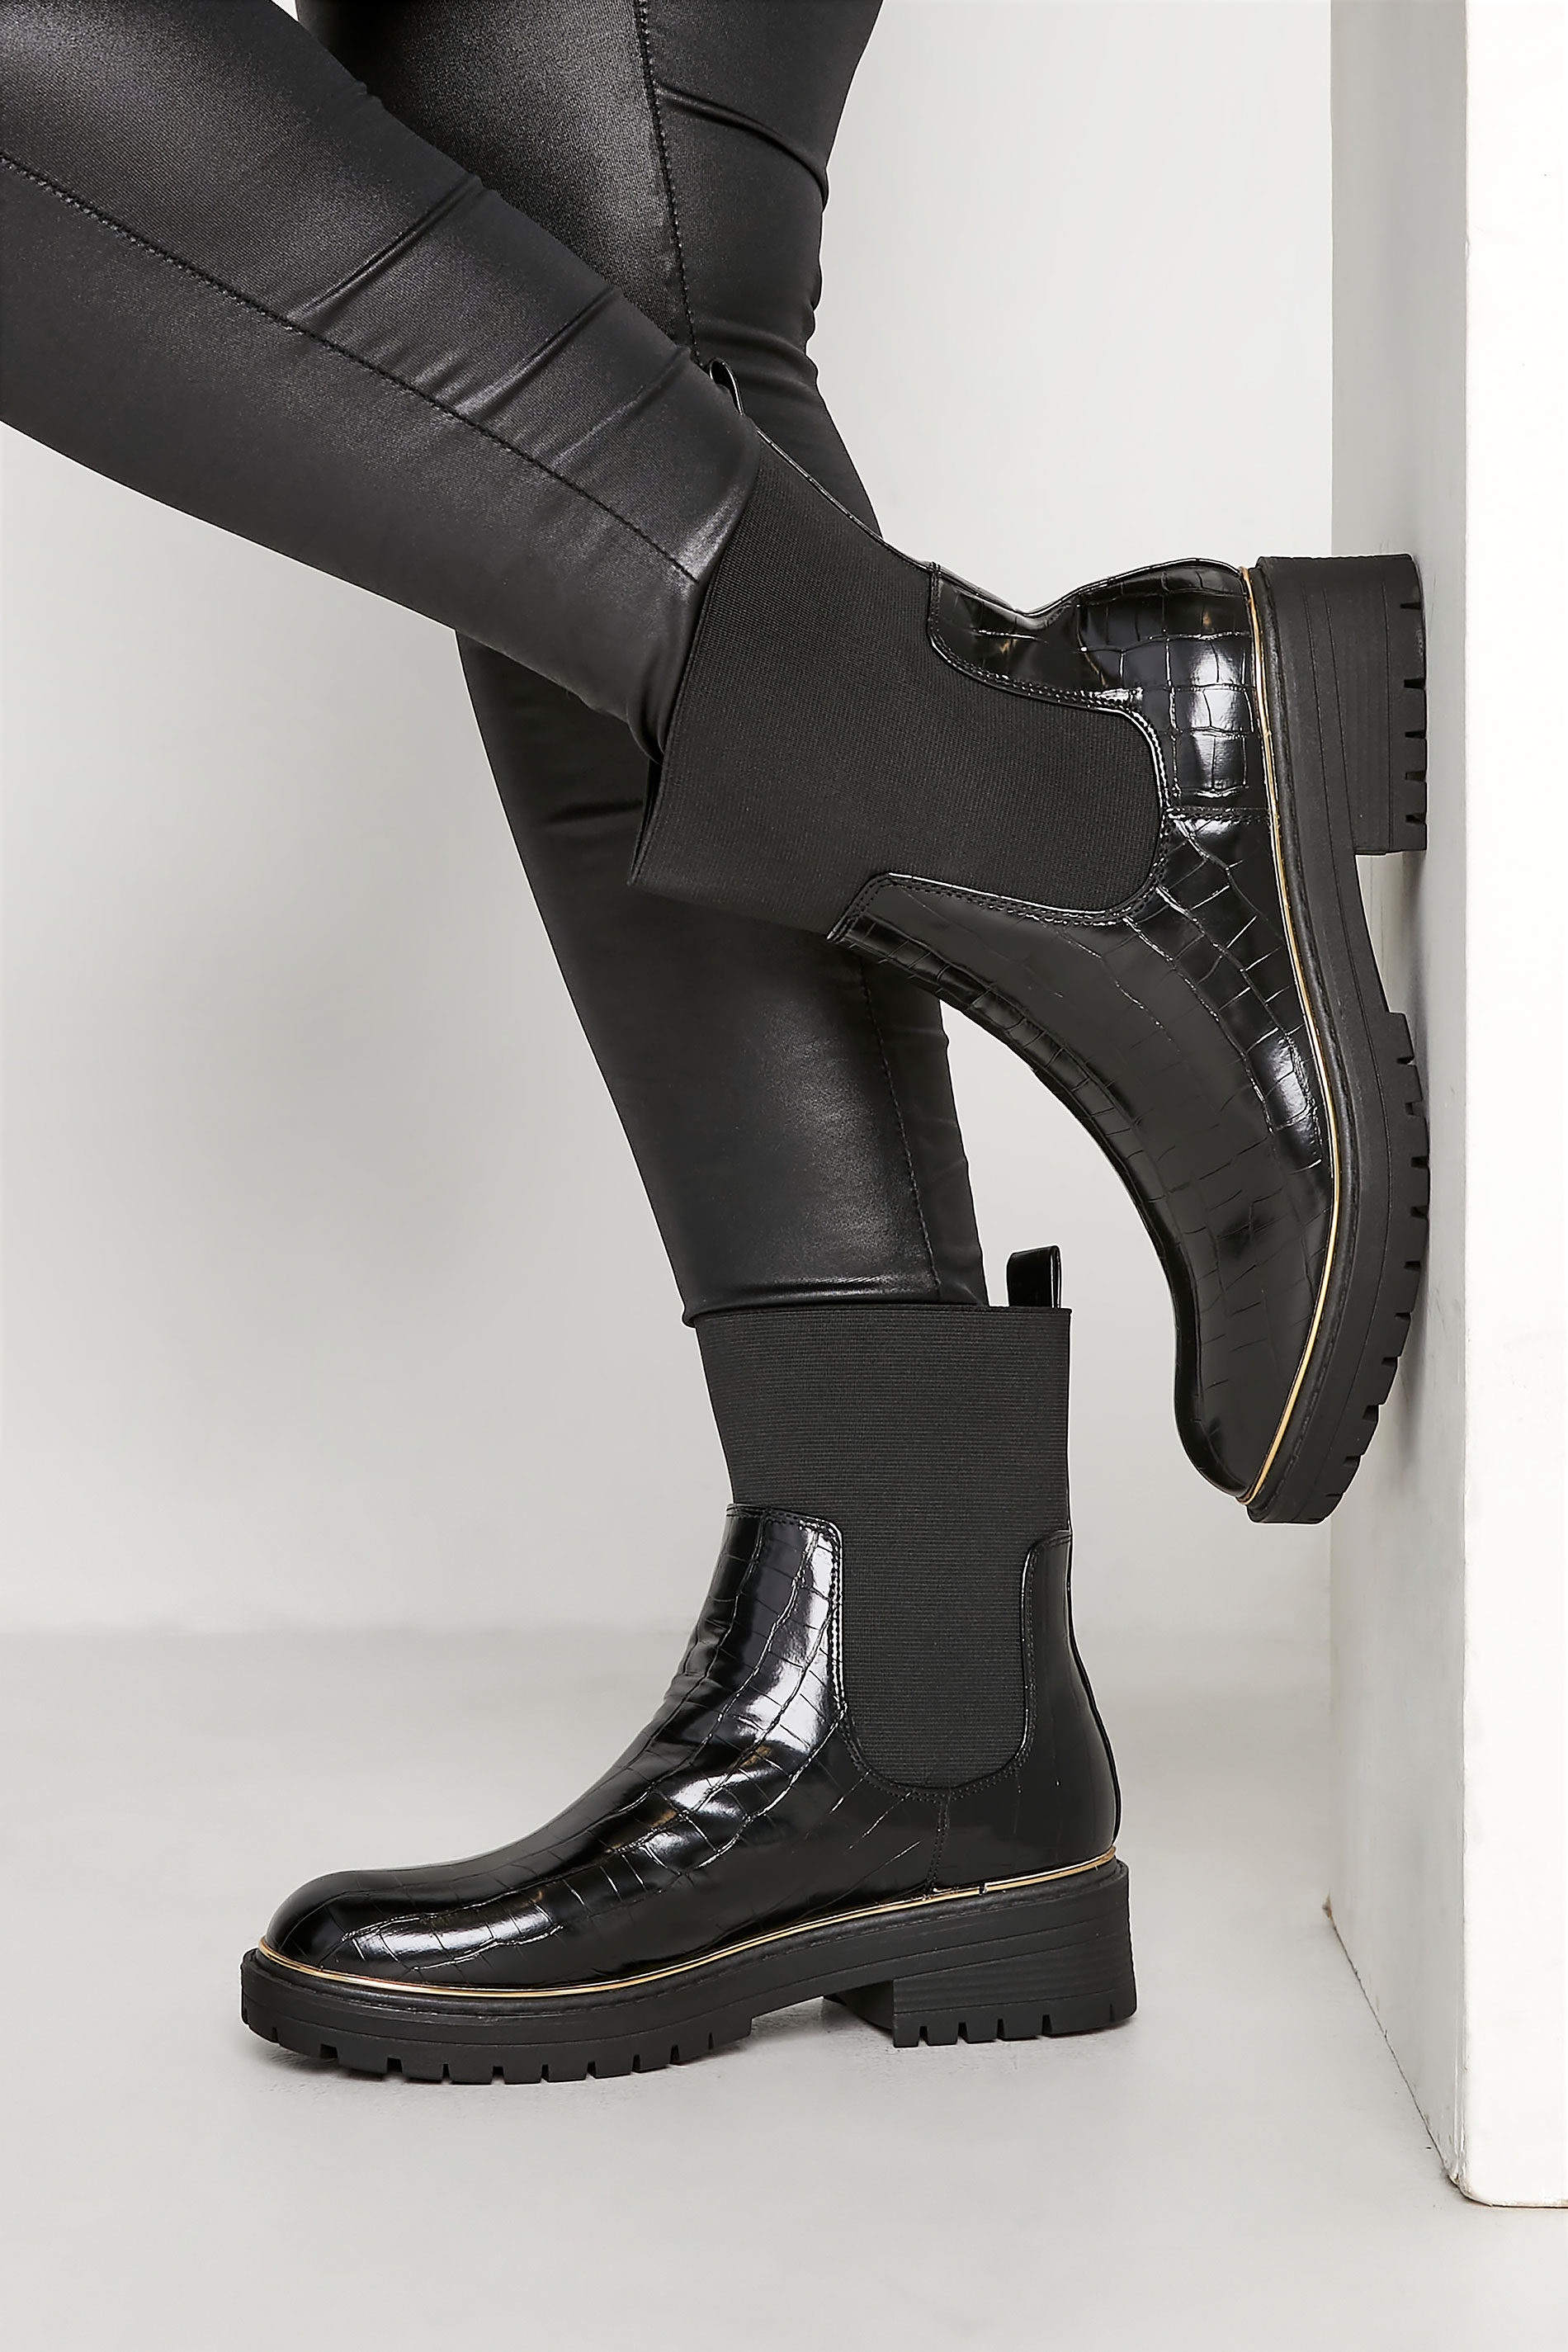 Plus Size LIMITED COLLECTION Black Croc Leather Look Ankle Boots In Standard Fit | Yours Clothing 1